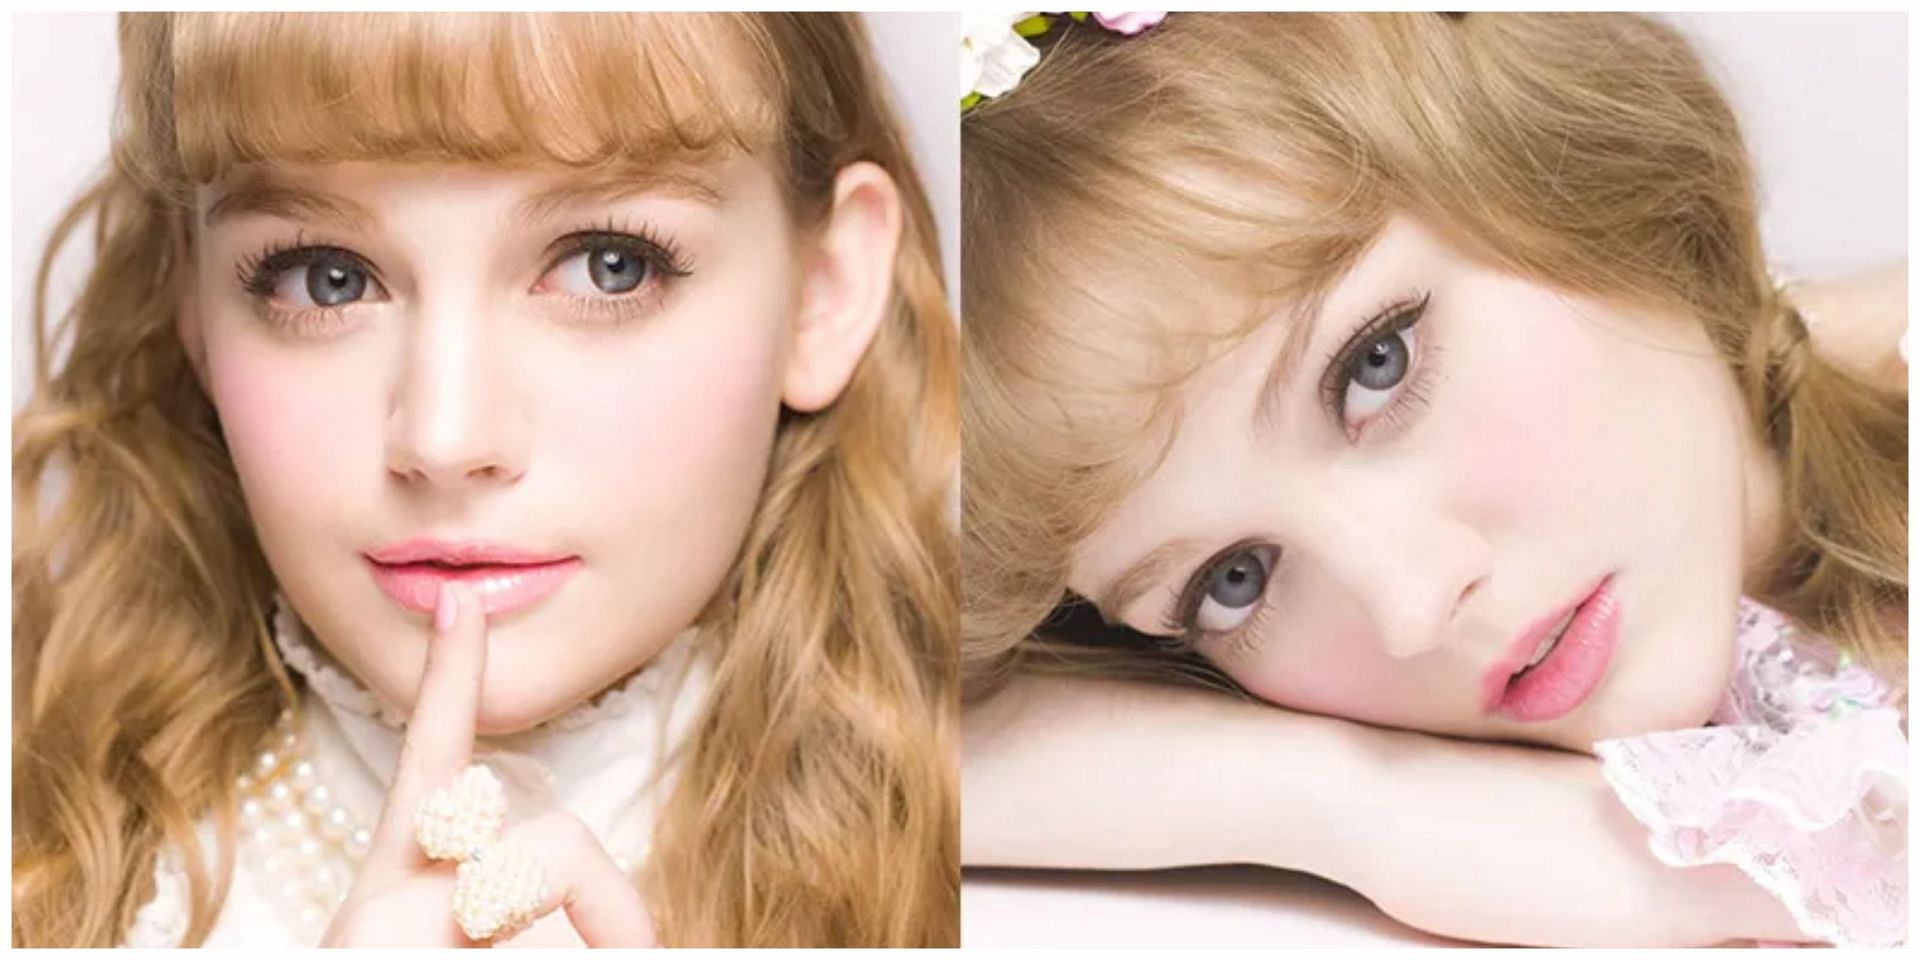 Dakota Rose is a real-life Barbie, who&#039;s famous in China and Japan. (Image via Pinterest)